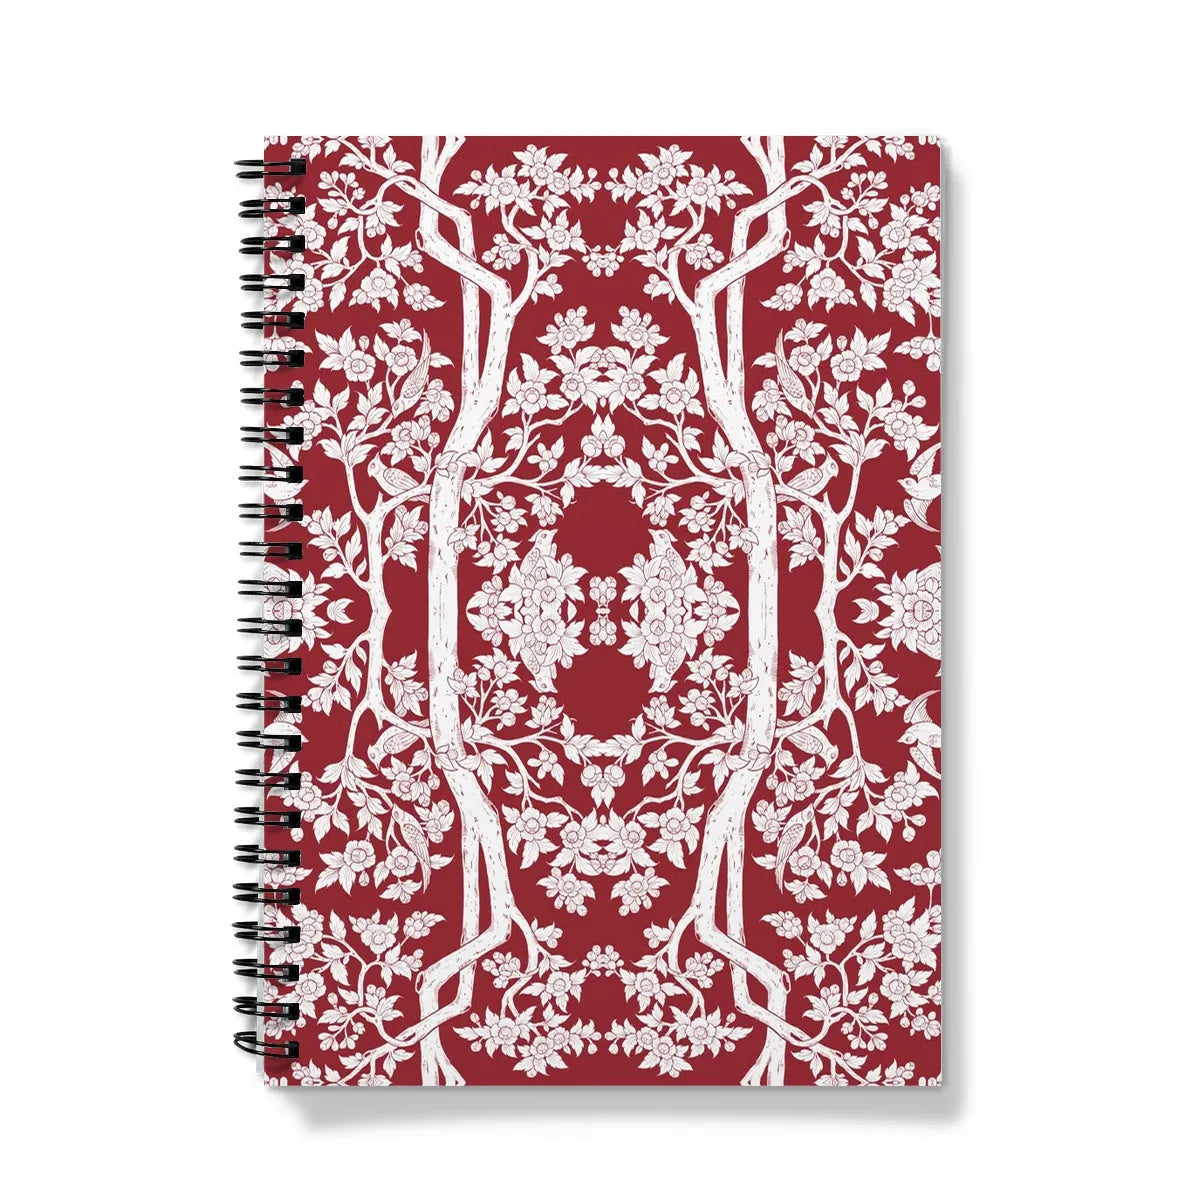 Aviary Red Notebook - A5 - Graph Paper - Notebooks & Notepads - Aesthetic Art